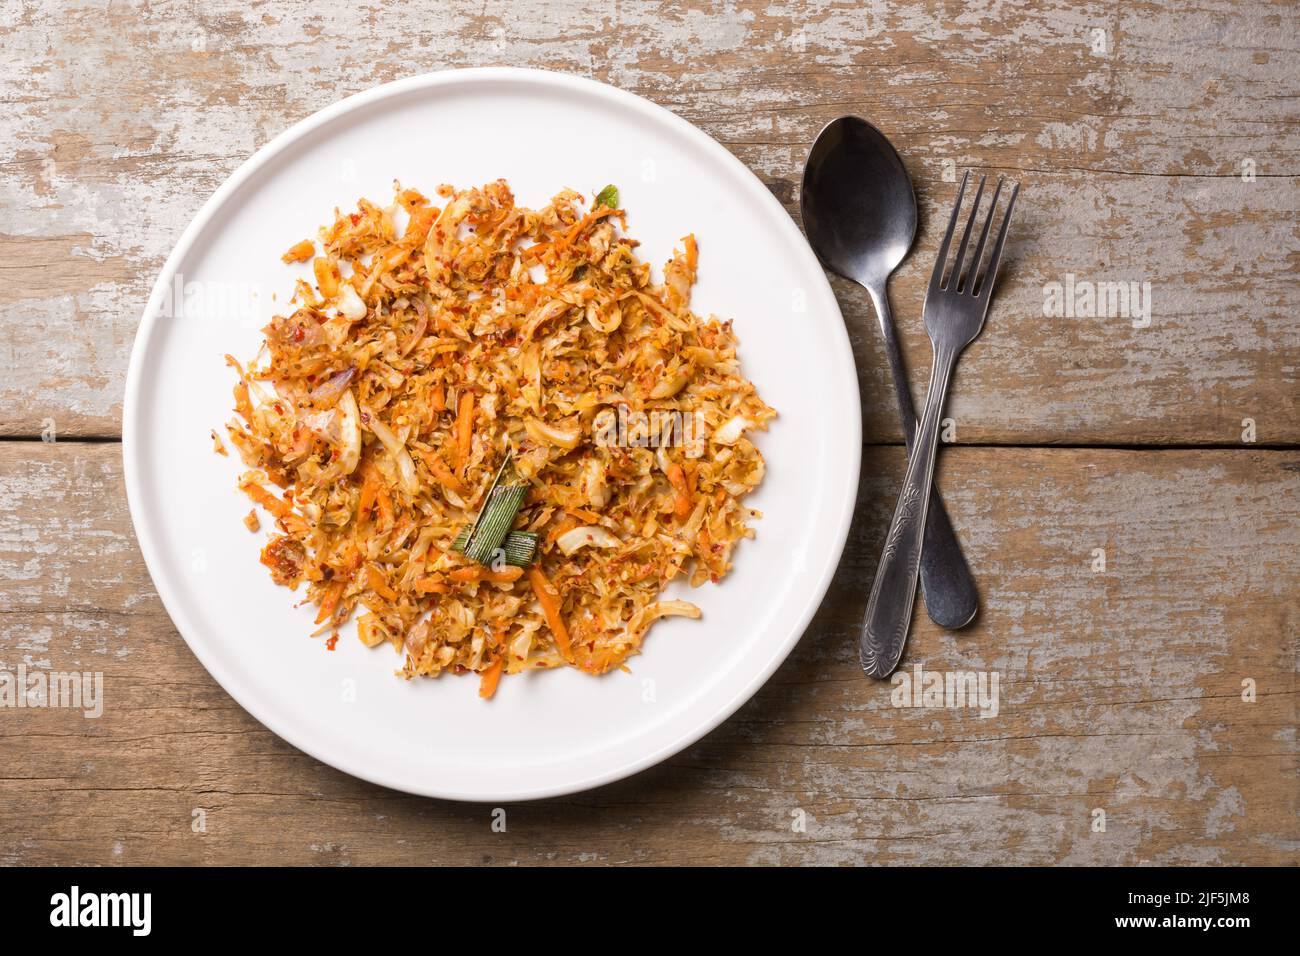 fresh healthy vegetable dish in a white plate, cabbage and carrot cooked with olive oil and herbs, sprinkled mustard seeds, placed on a table top Stock Photo